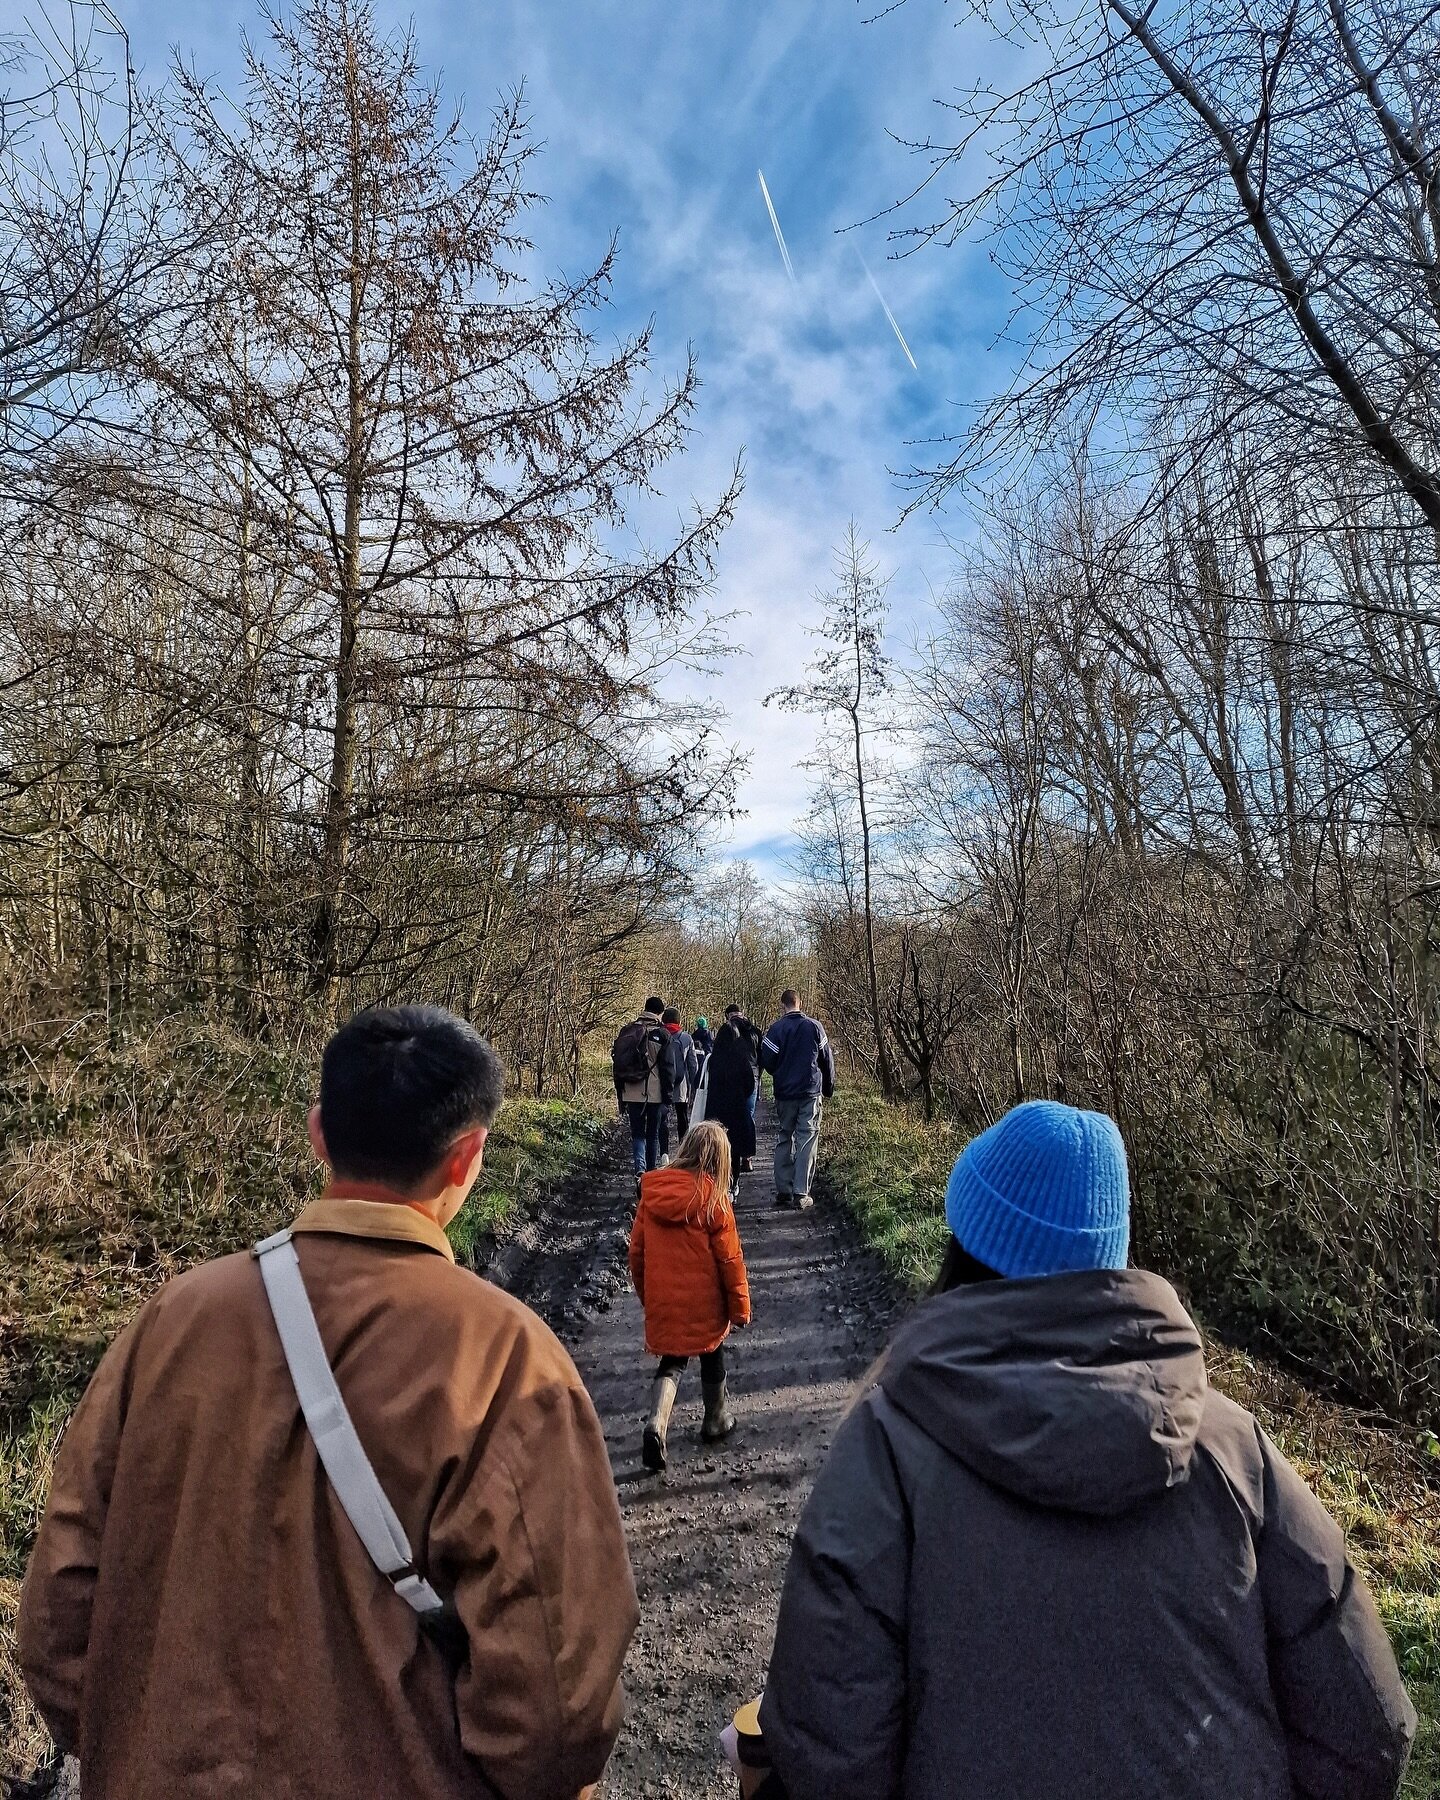 Meditation &amp; Coffee Walk. 

Come join us for a walk at Longford Park. We would love to catch up, see how you&rsquo;re doing and check in. 

Sunday - March 24th, 10am! 

Head over to our website to confirm your attendance. 

#tablemcr